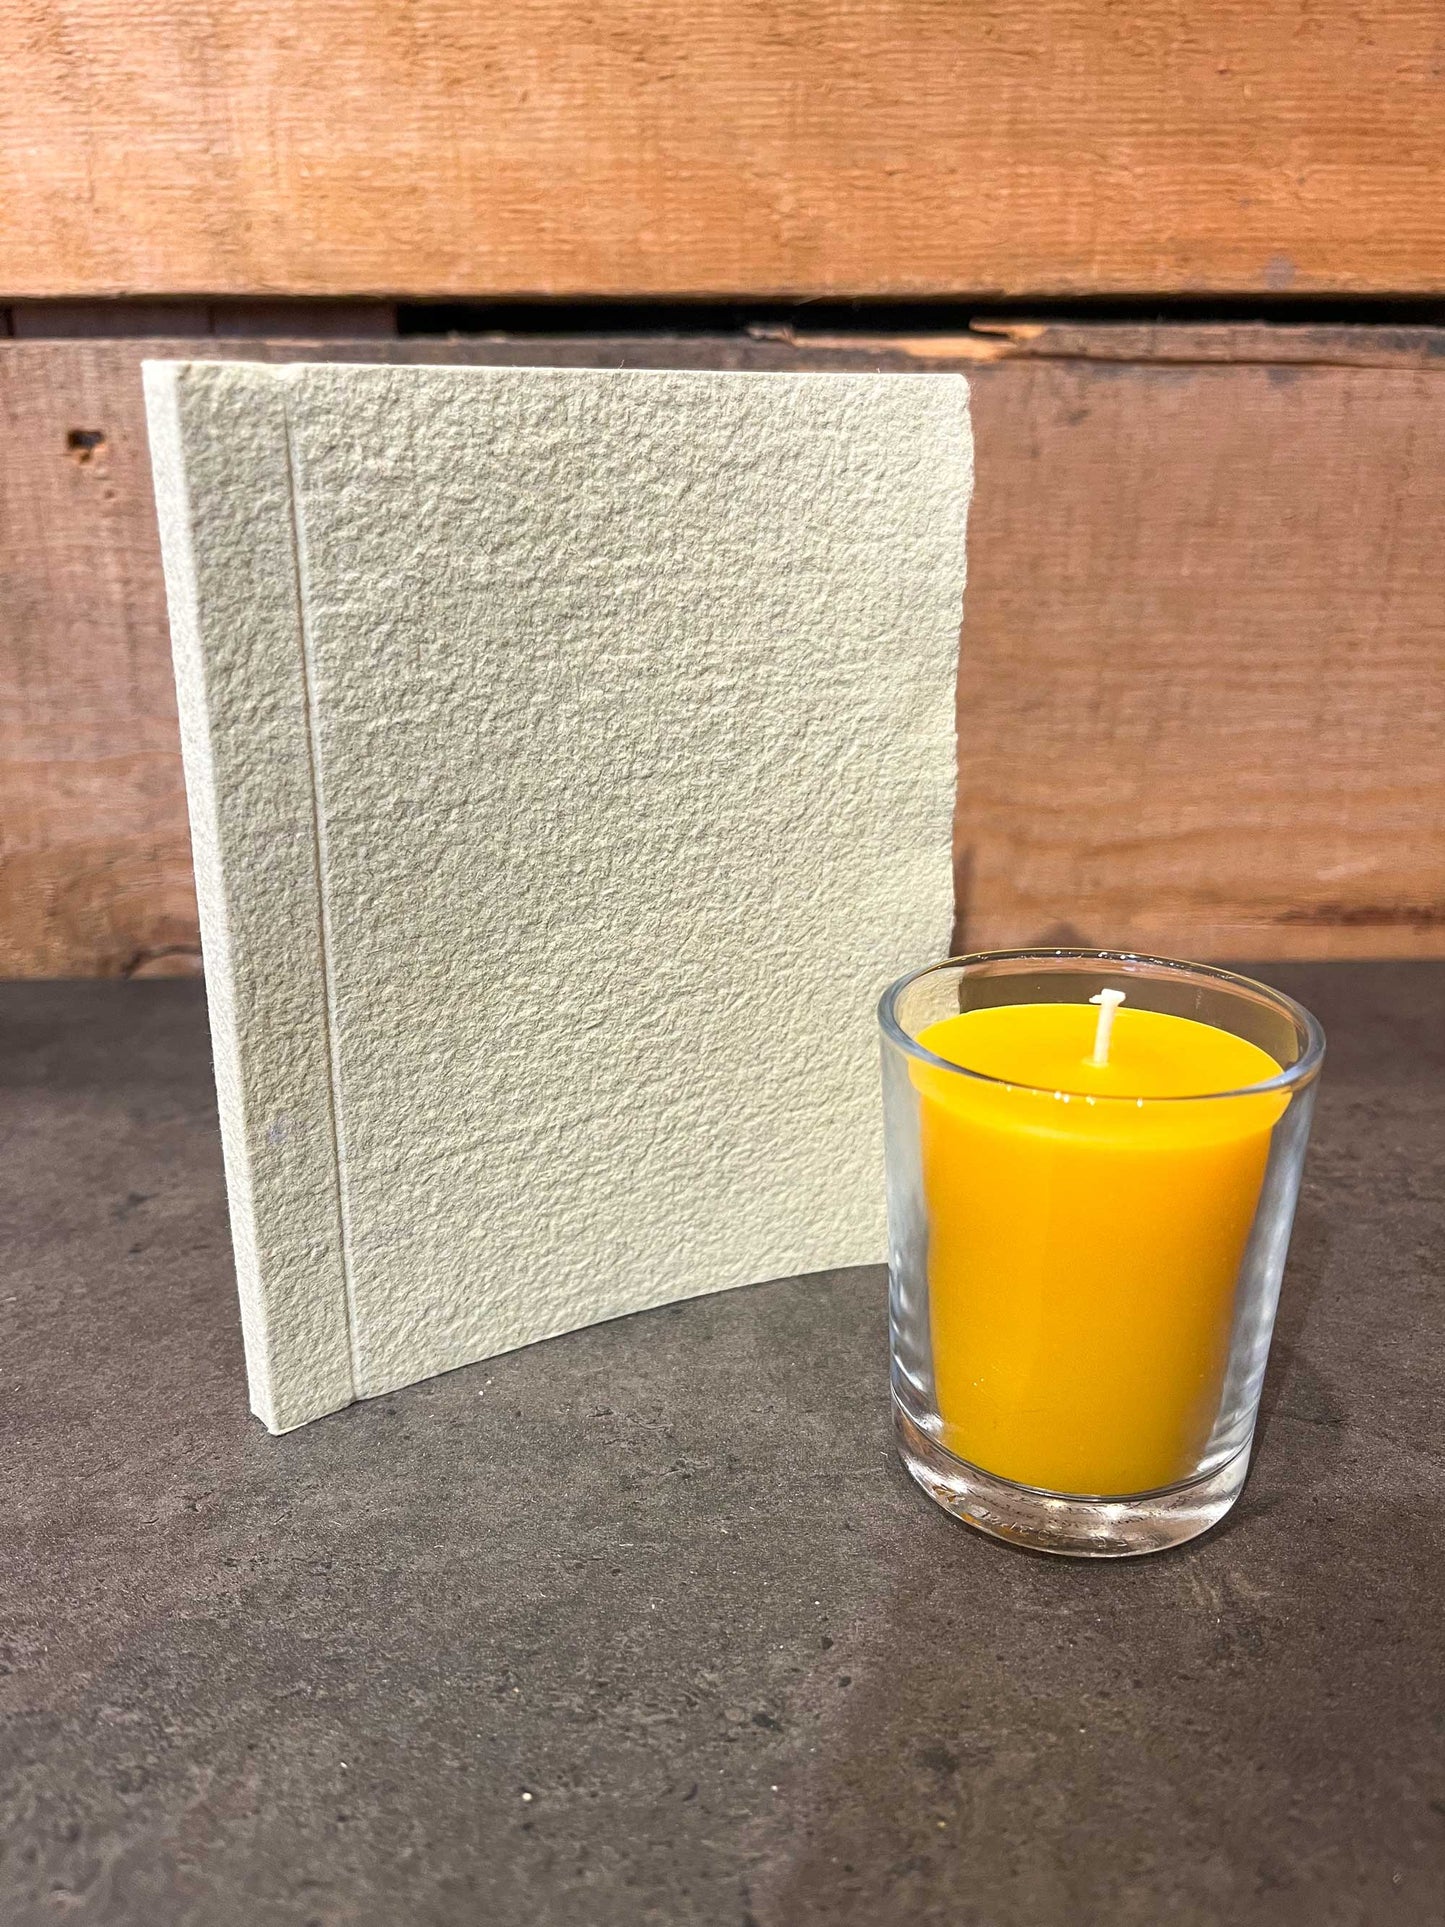 Handmade beeswax votive candle in glass cup next to pale green eco-friendly notebook